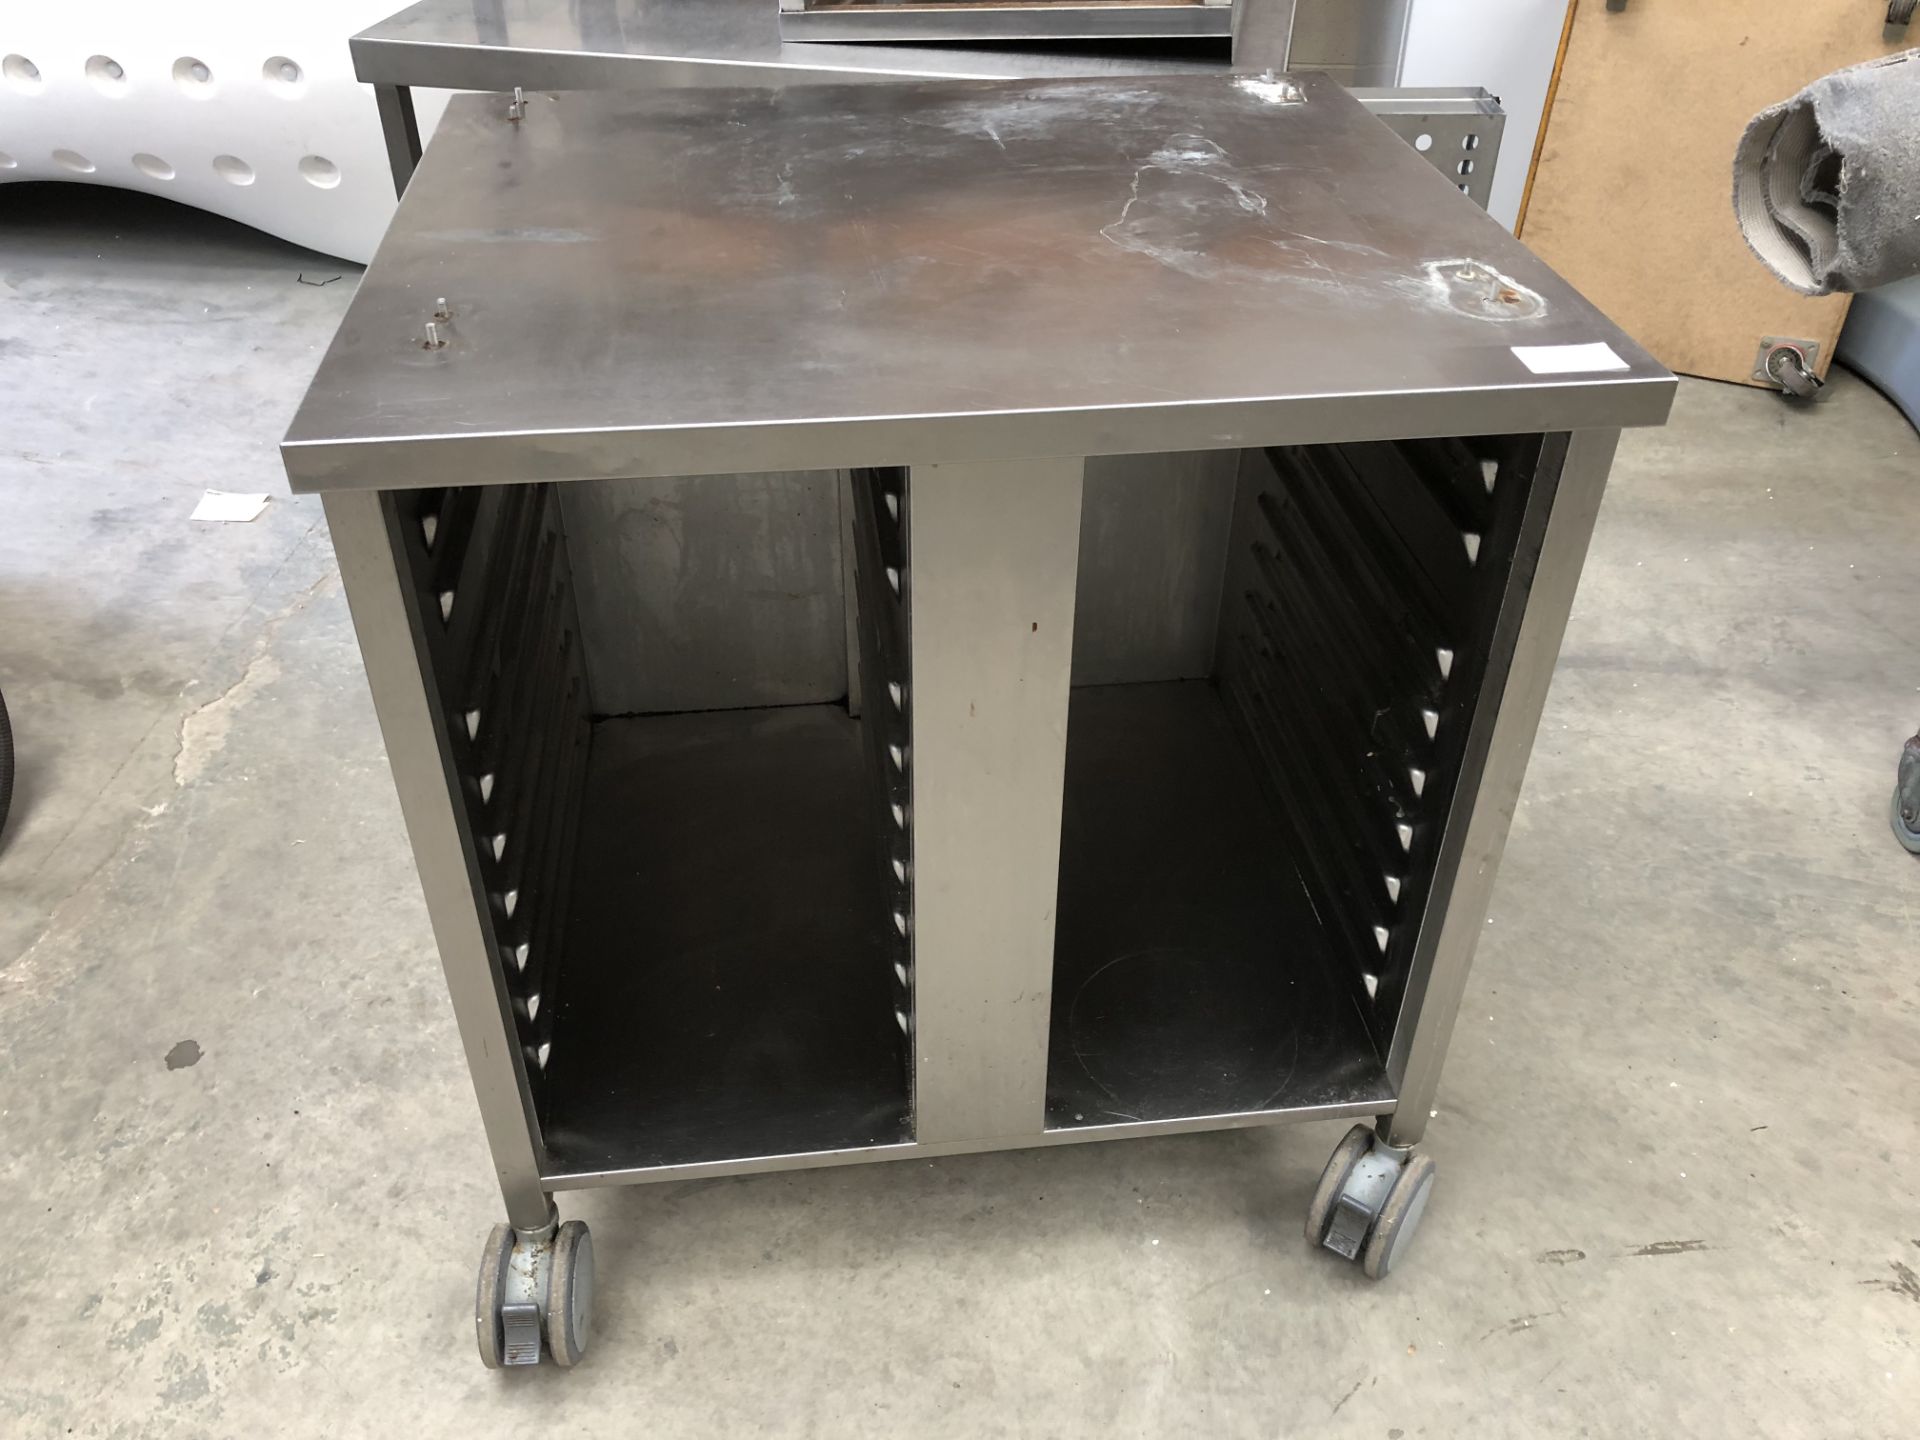 Rational Combi Steamer Stand Stainless Steel on Large Wheels